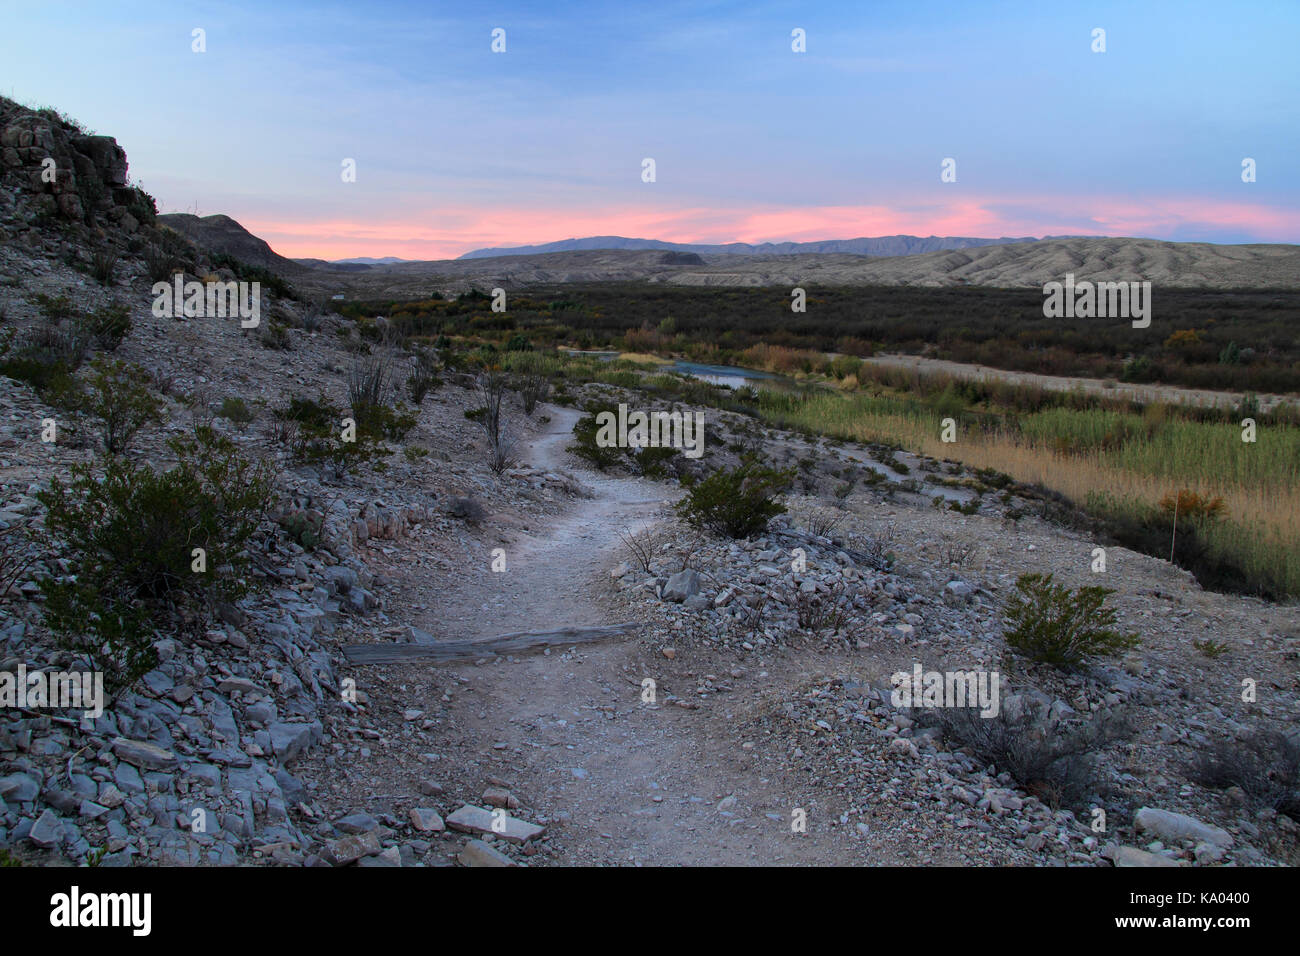 The Rio Grande Village Nature Trail provides visitors with easy access to spectacular vistas of the Rio Grande Valley, Big Bend National Park, Texas Stock Photo